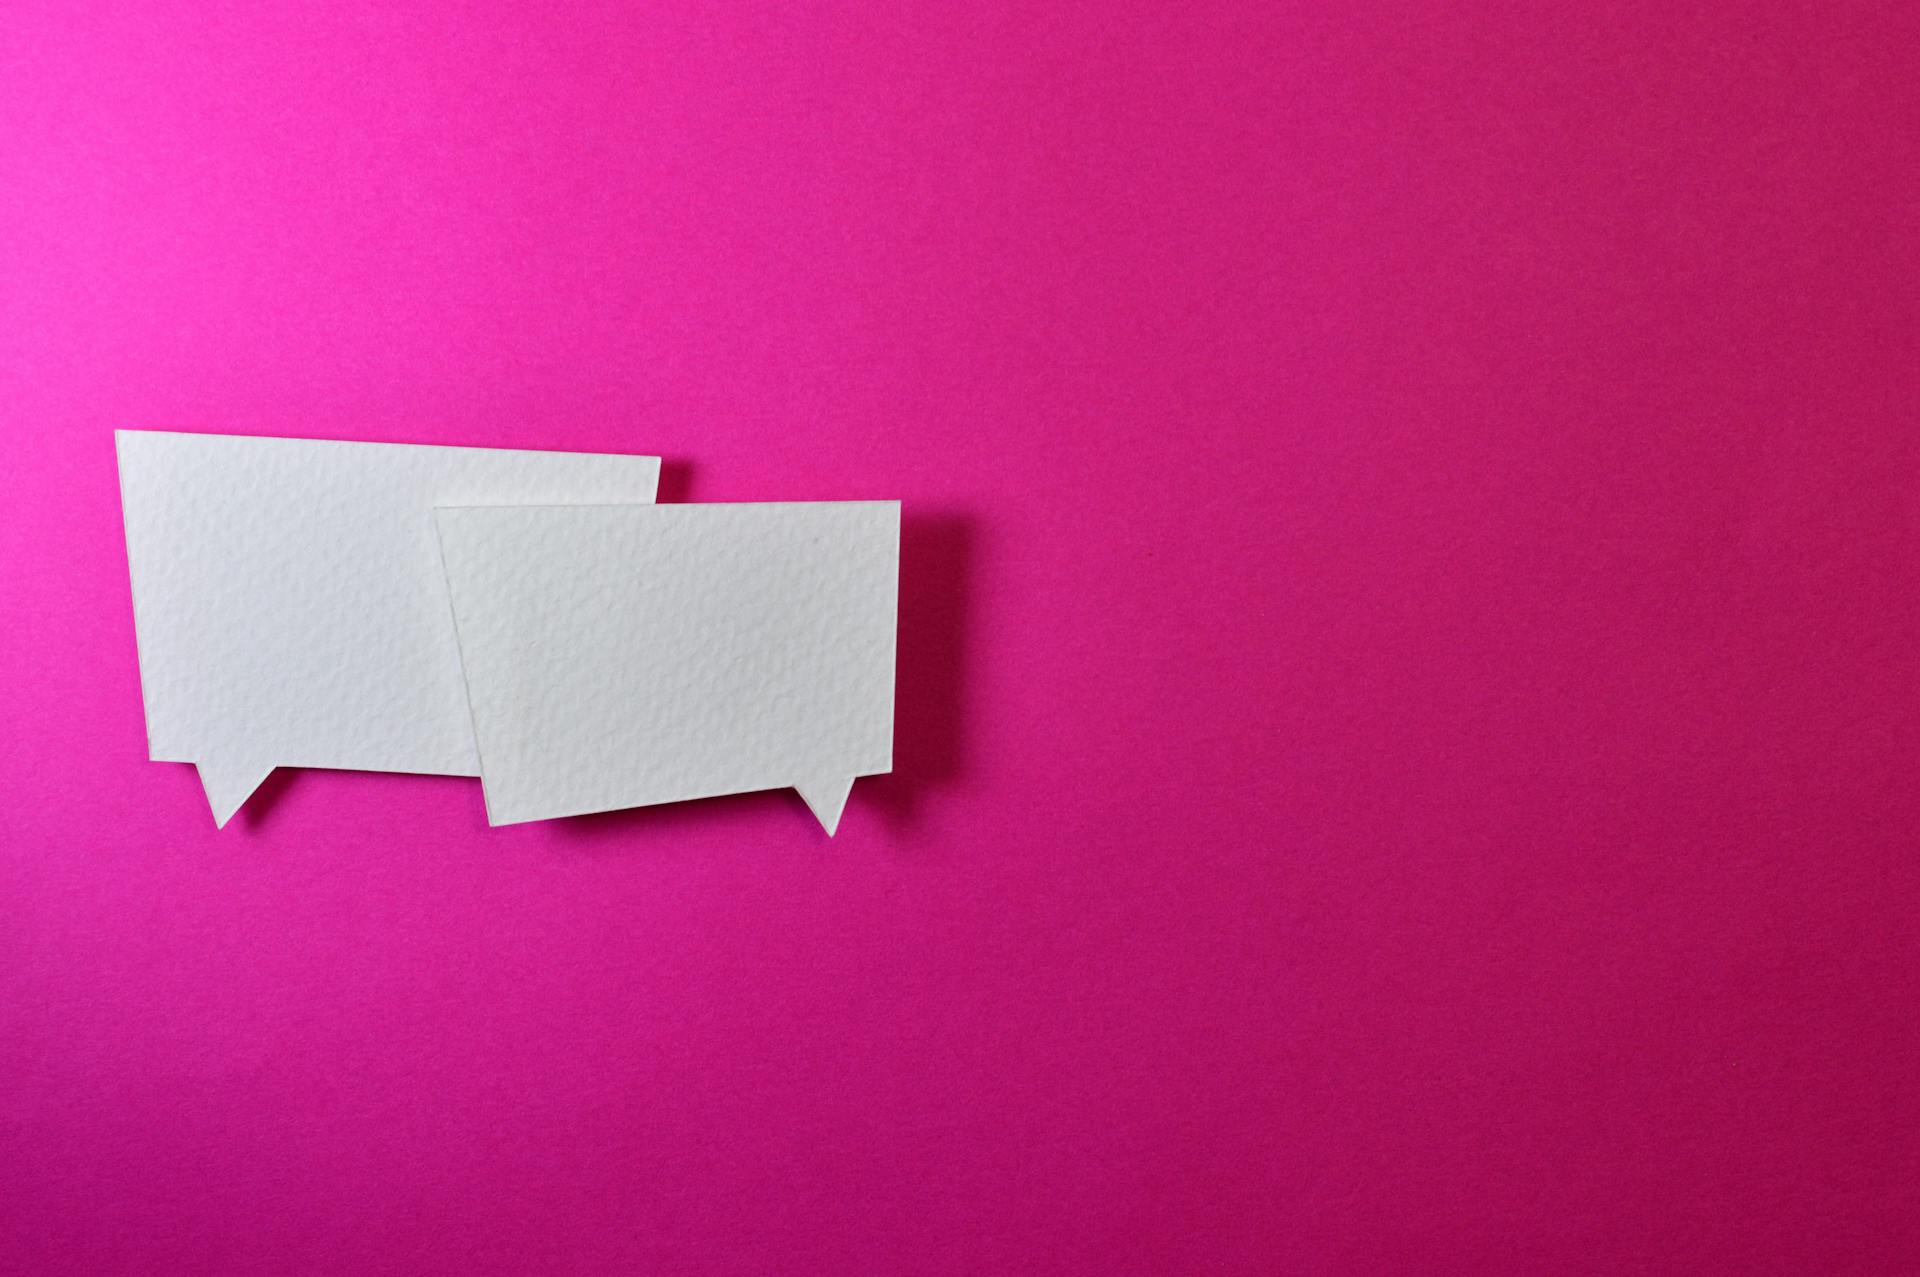 Sticky-note pads shaped like speech bubbles, with pink background